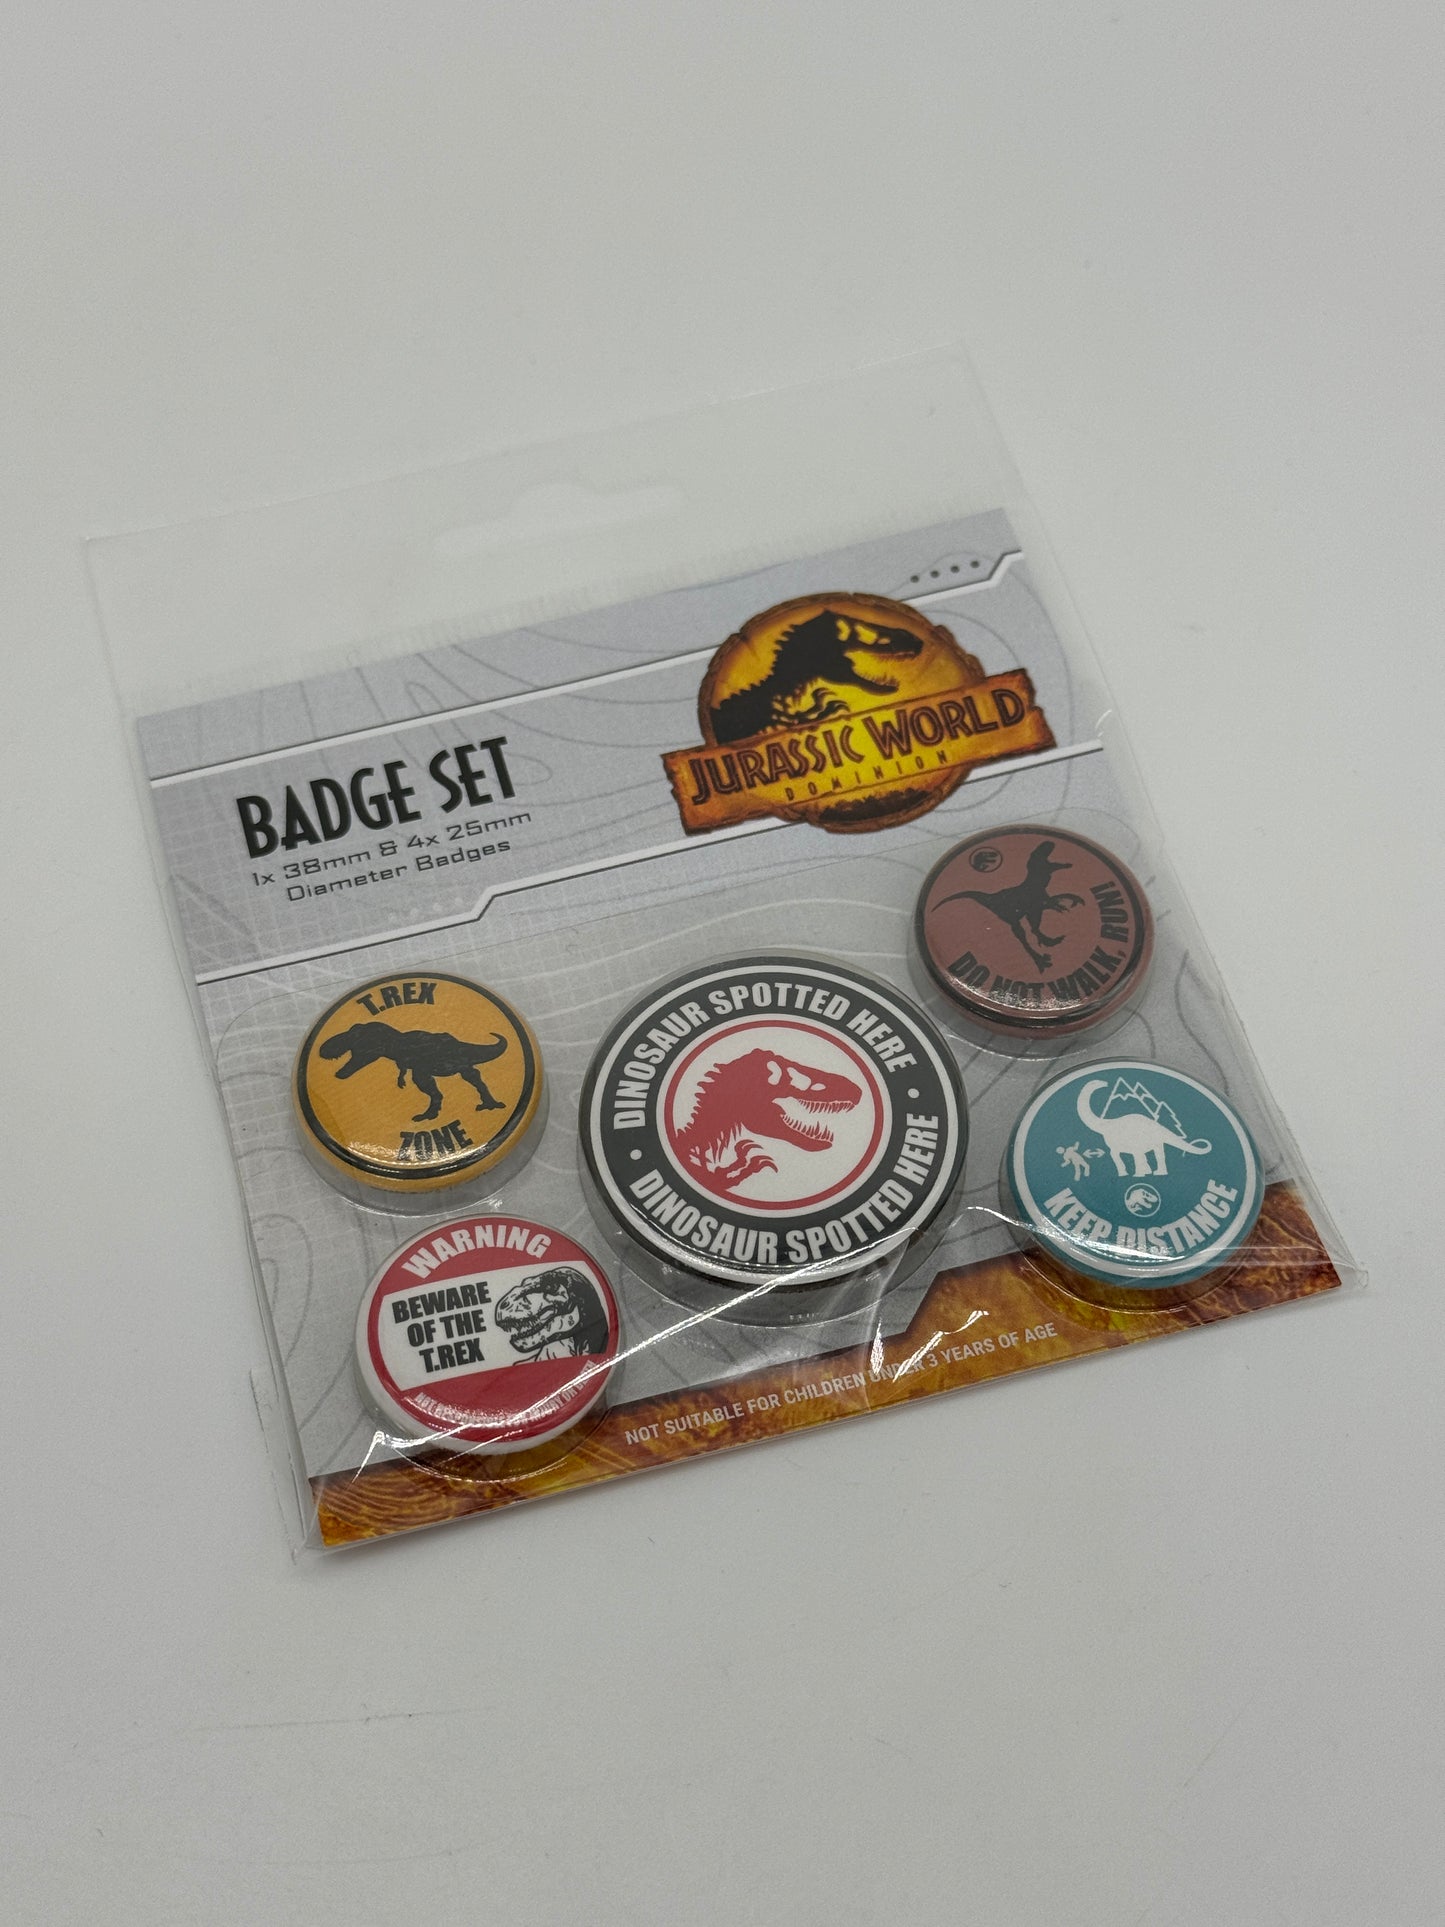 Jurassic World Dominion "Ansteck-Buttons" 5er-Pack Warning Signs (Pyramid)